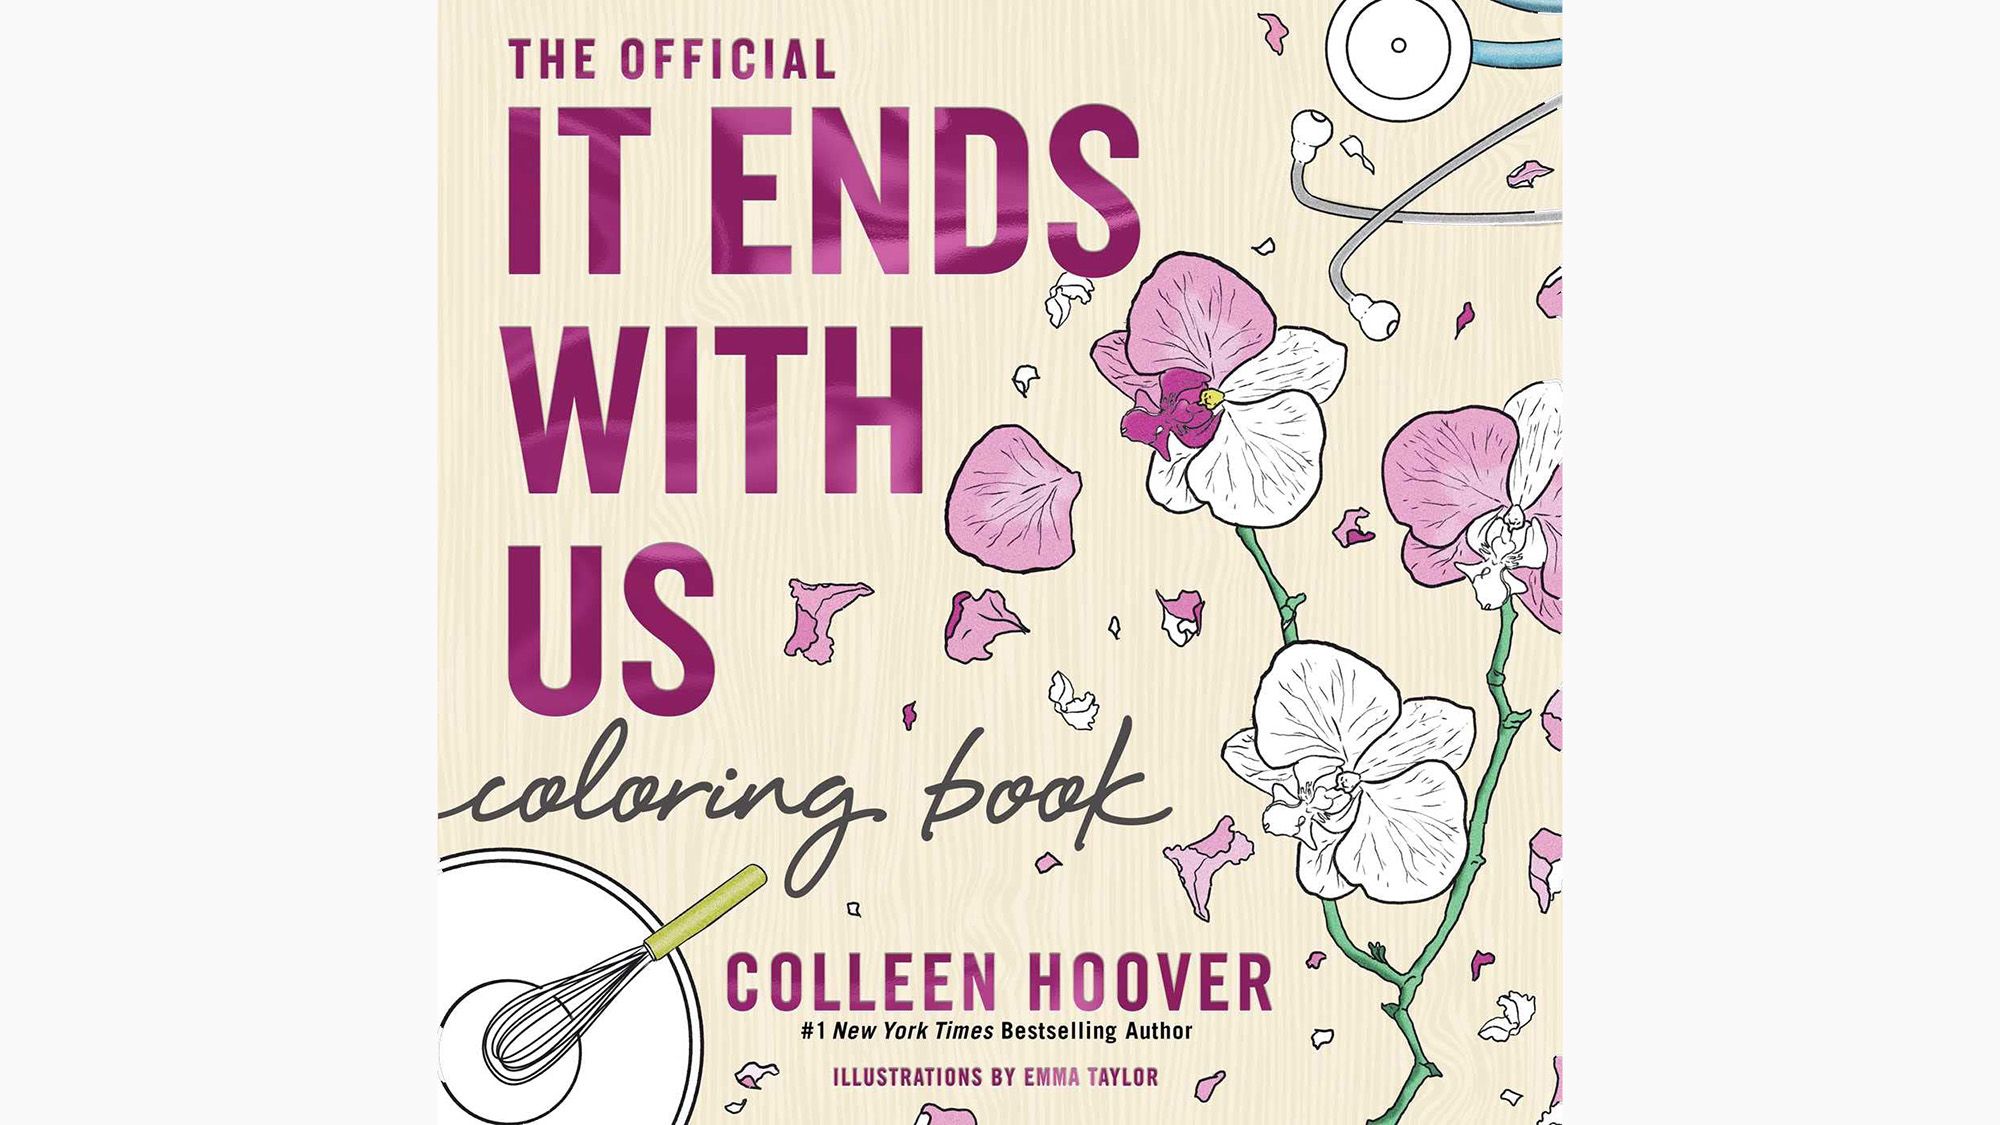 Bestselling writer Colleen Hoover apologizes for planned coloring